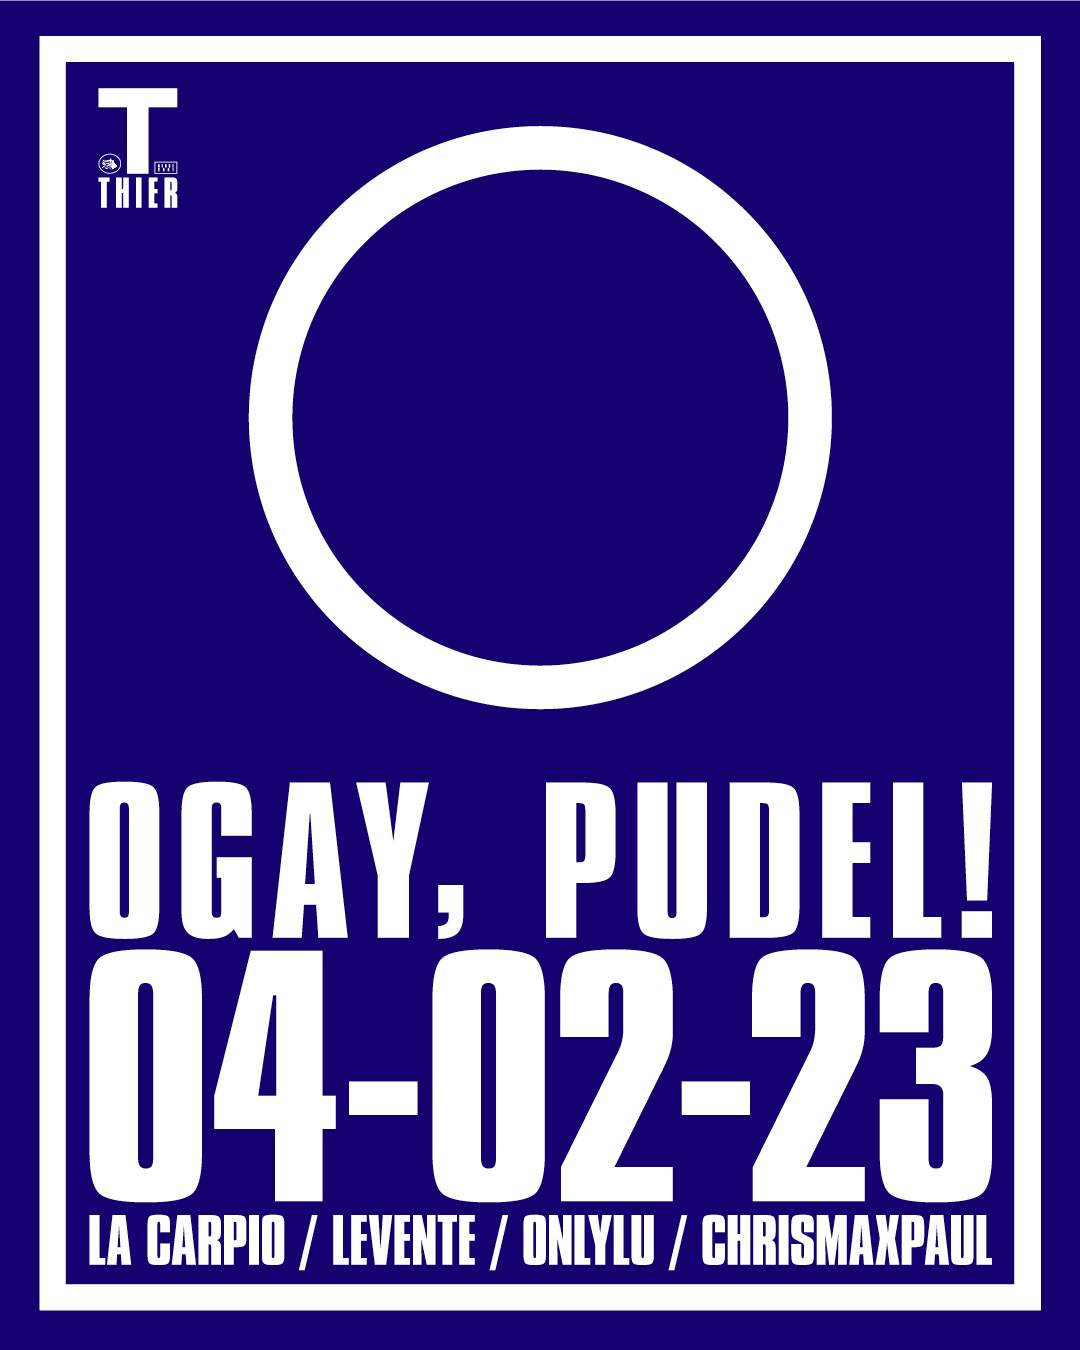 OGAY at PUDEL - フライヤー表